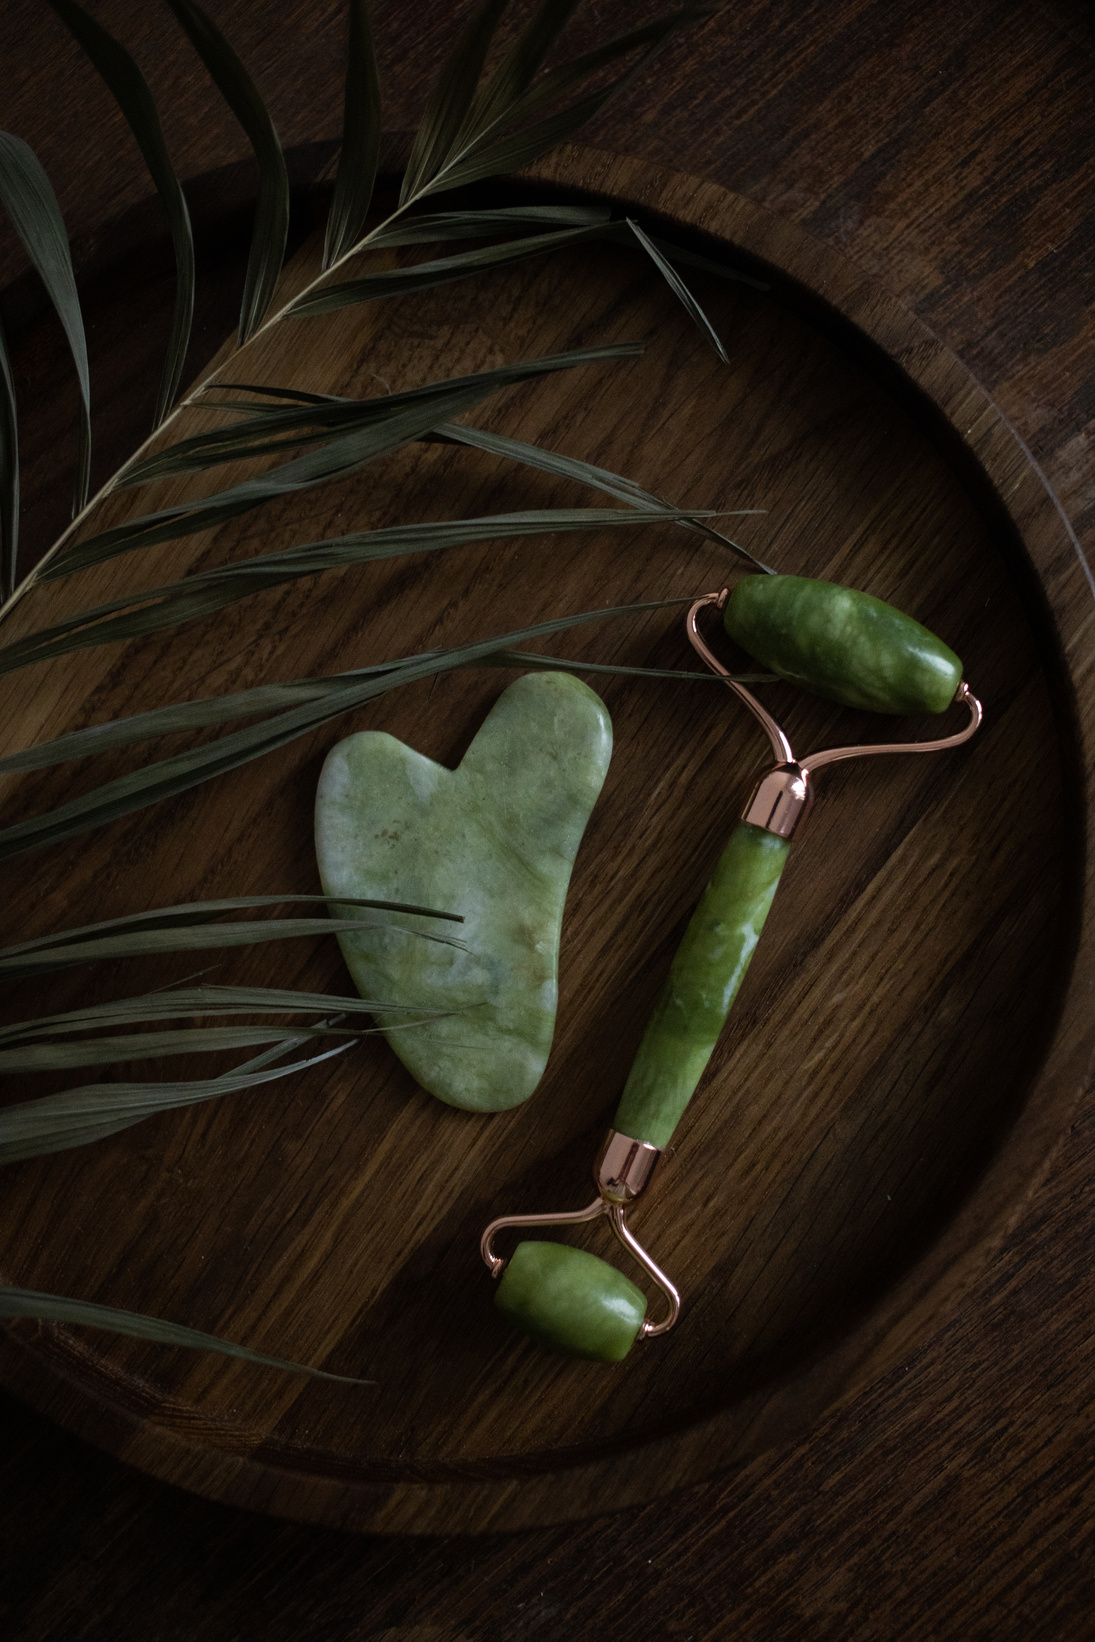 Gua sha and Jade Roller on Wooden Surface